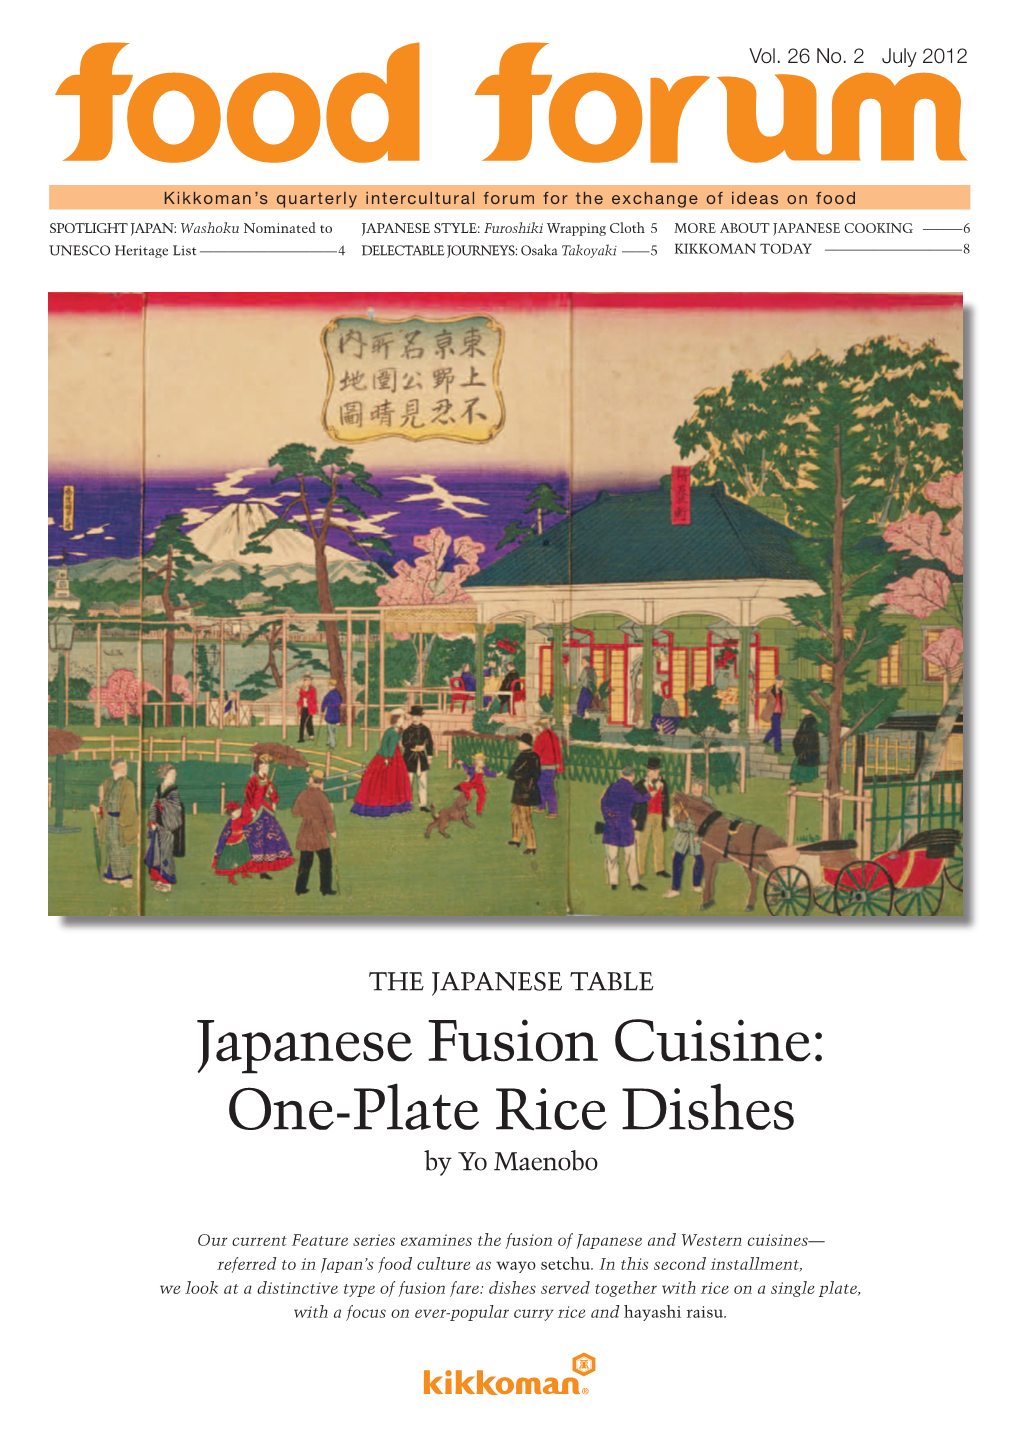 Japanese Fusion Cuisine: One-Plate Rice Dishes by Yo Maenobo